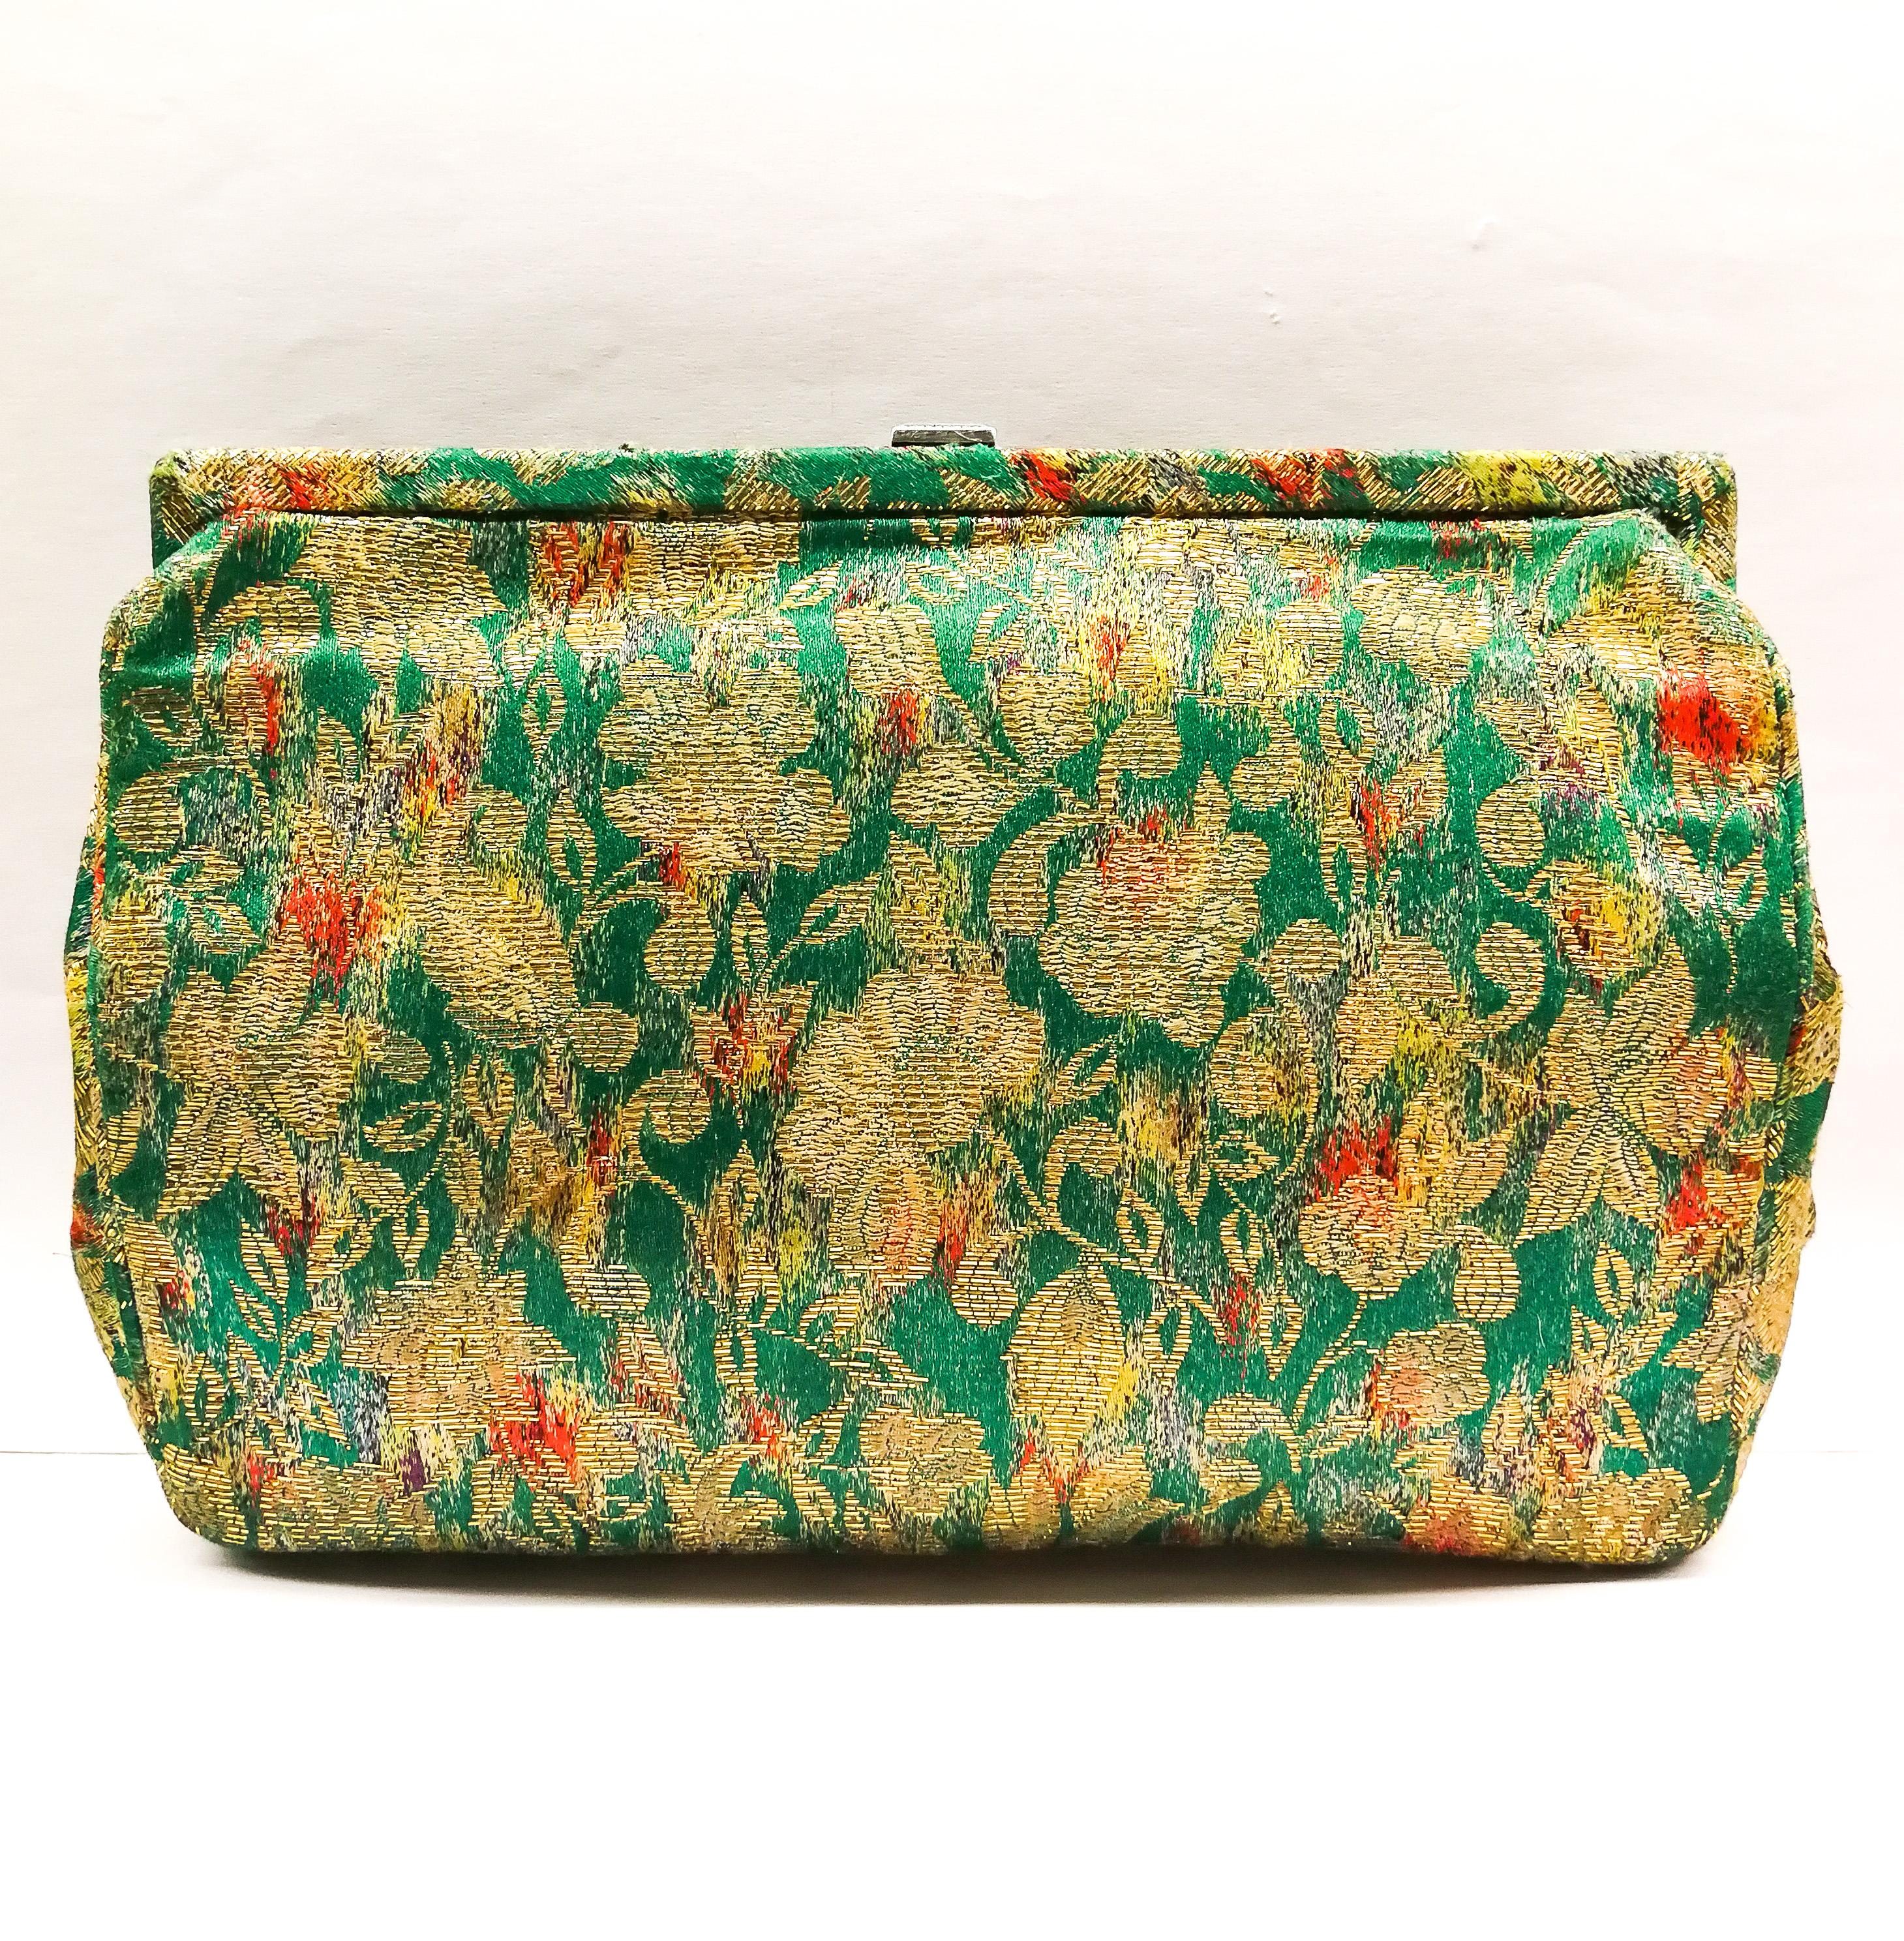 A ravishing, unique and highly decorative clutch bag, in green and red silk lame fabric, shot through with gold, with a very large silver, marcasite and green crysoprase clasp, that lifts to open. When opened, the interior is lined in turquoise and